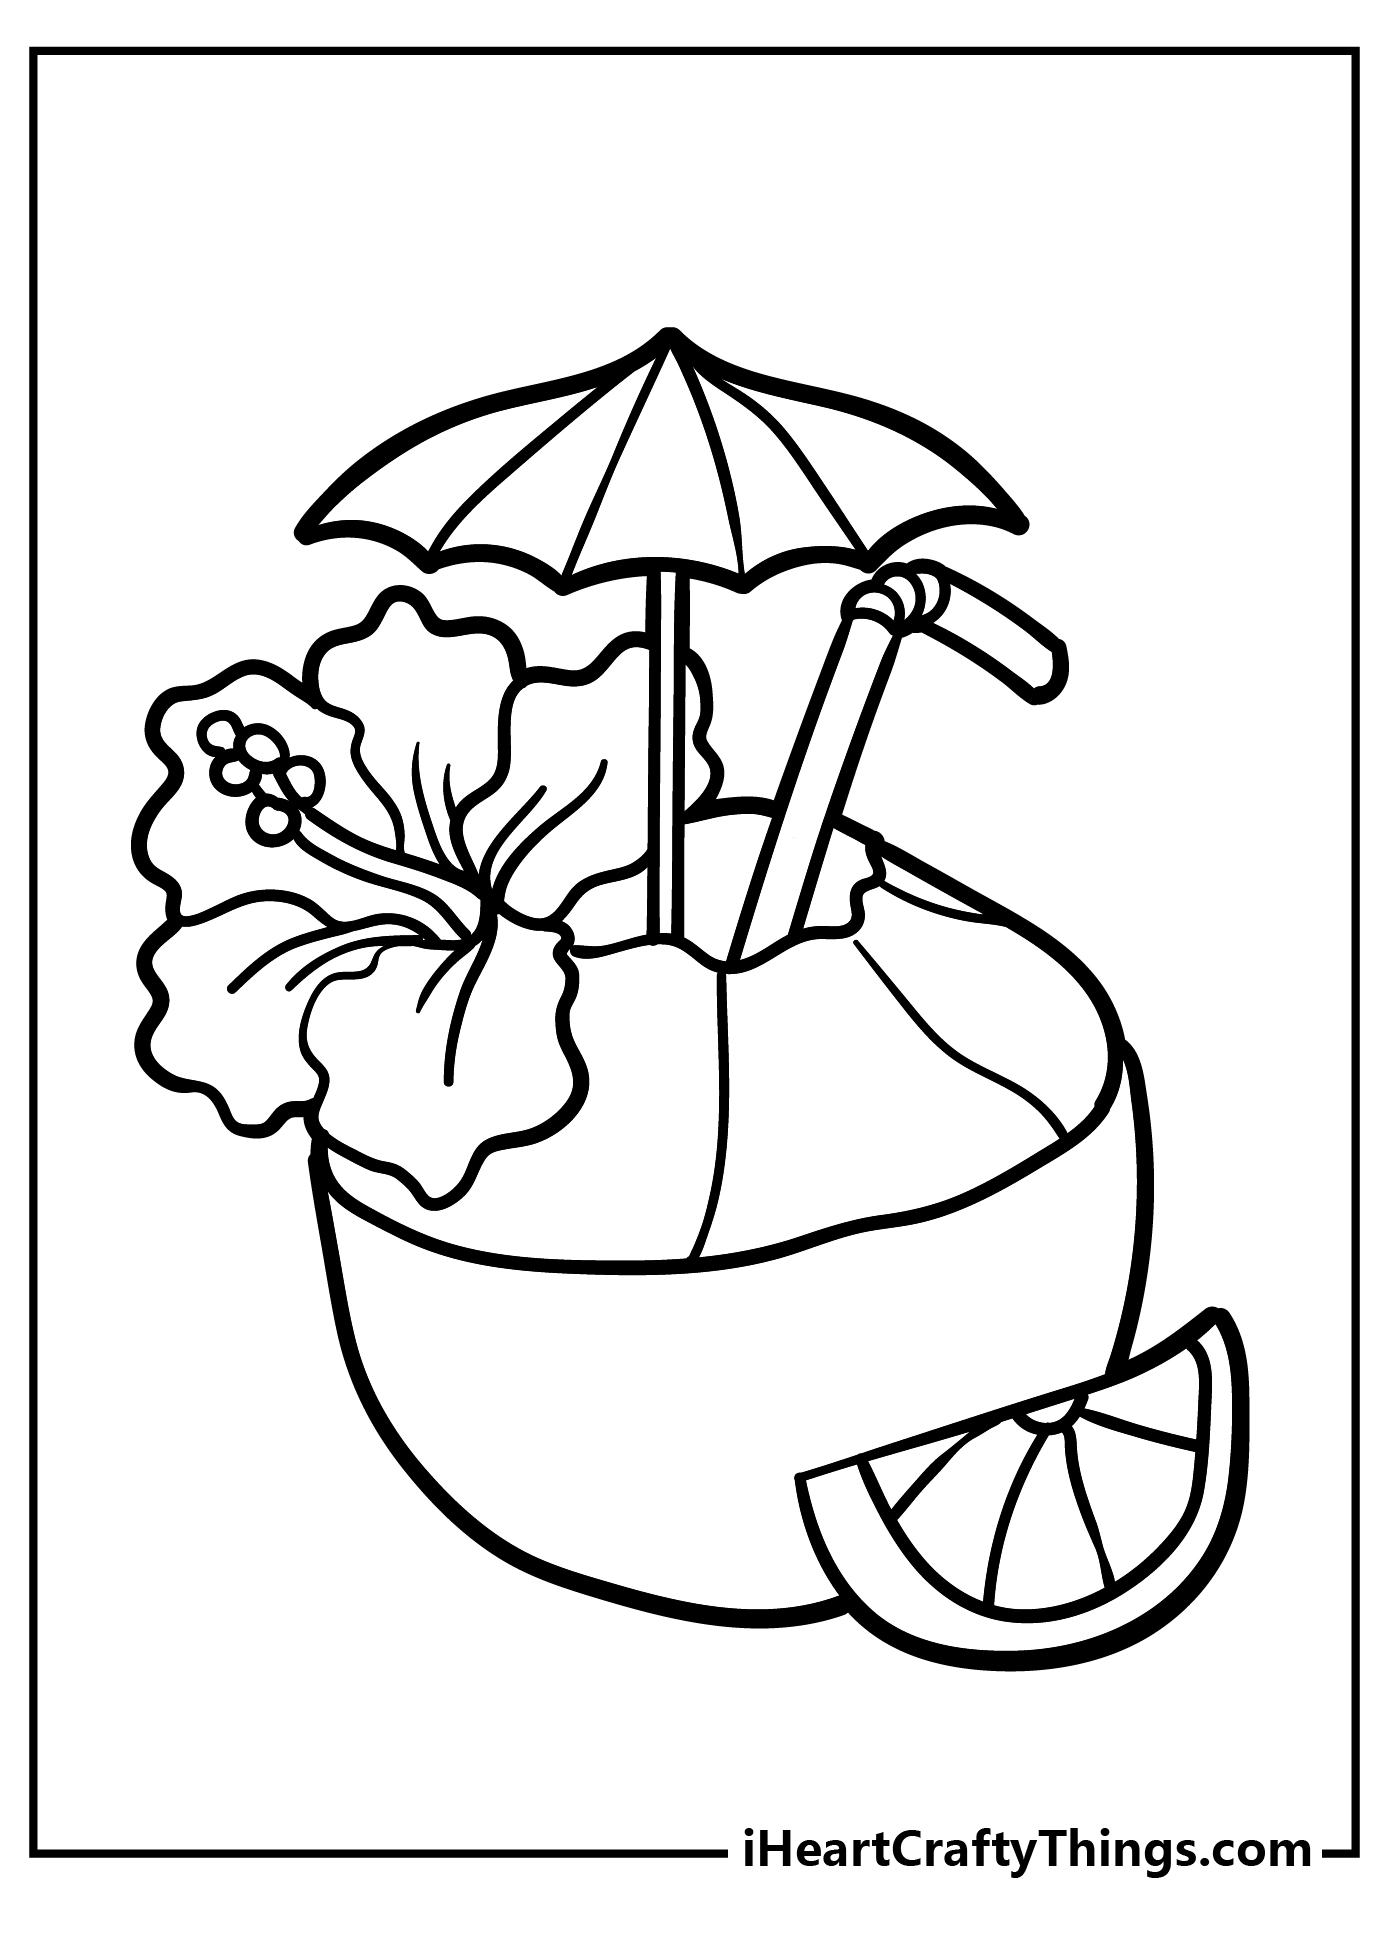 Printable Tropical Coloring Pages Updated 20